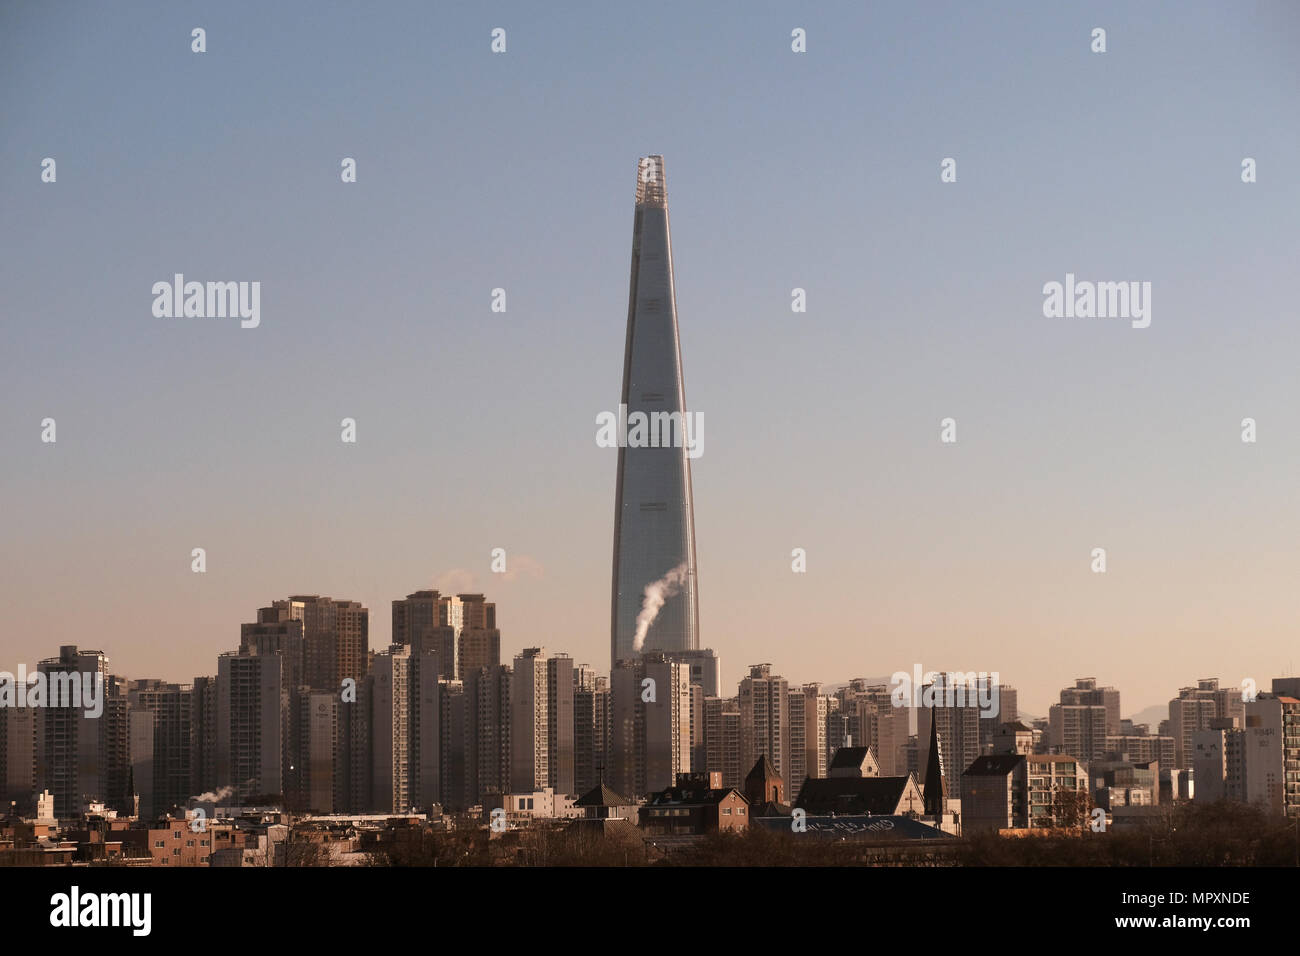 The skyline of Songpa-gu district and Lotte World Tower skyscraper located in Seoul, South Korea. Stock Photo